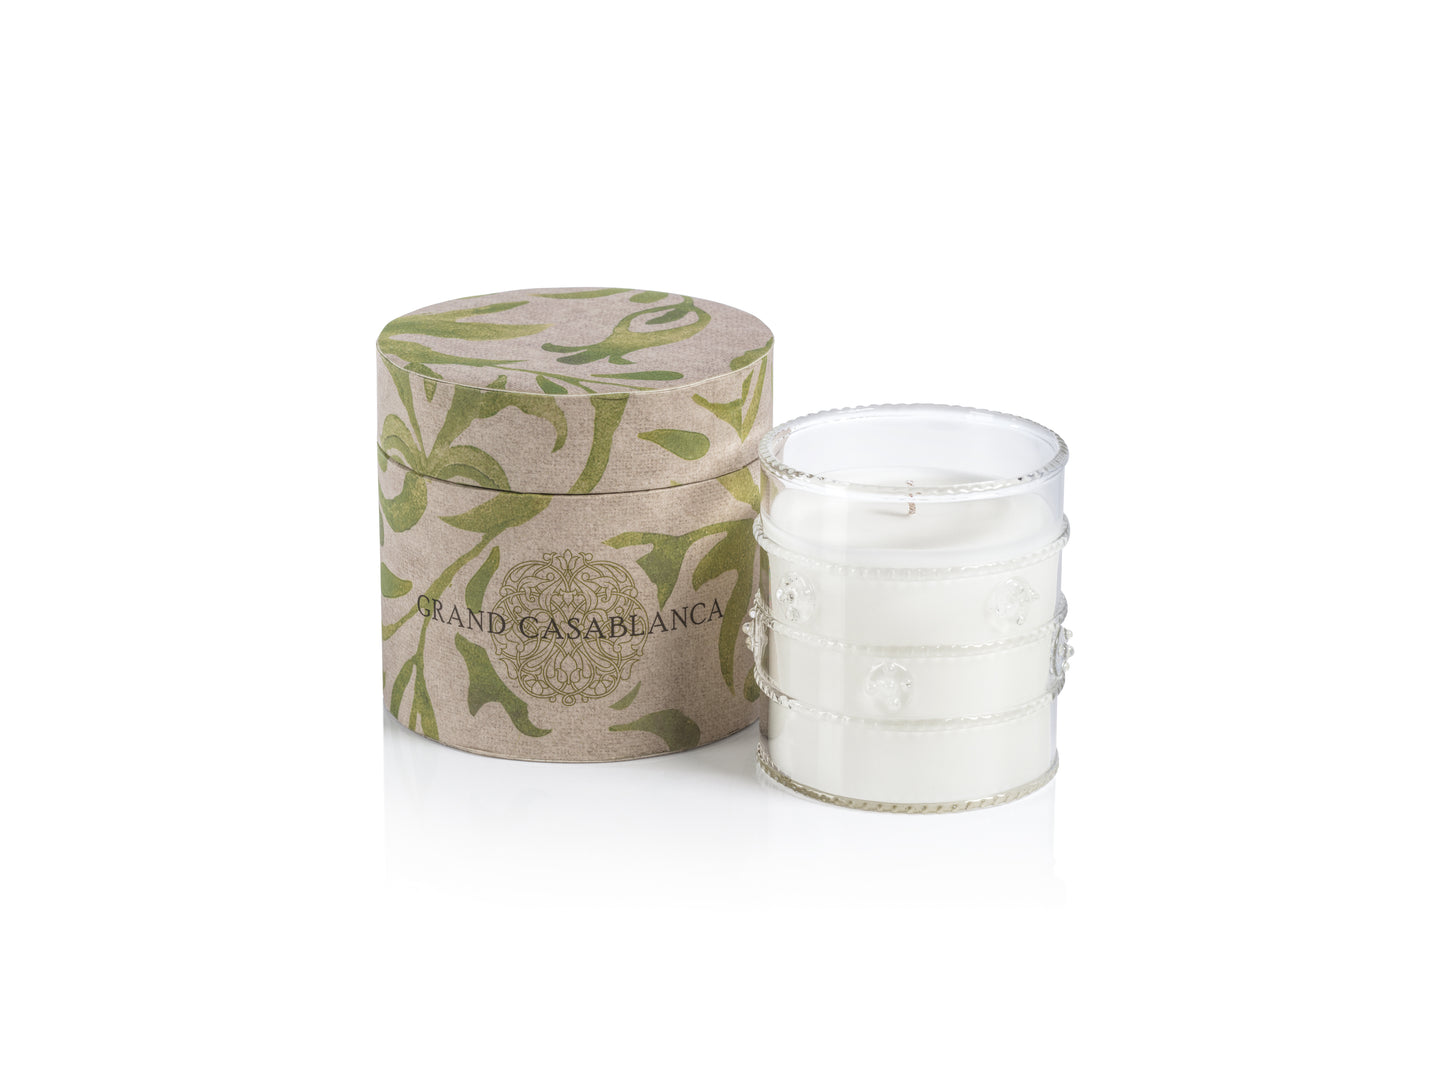 WILD TUBEROSE Zodax Grand Casablanca Scented Candle 6.5 oz - Gift Boxed